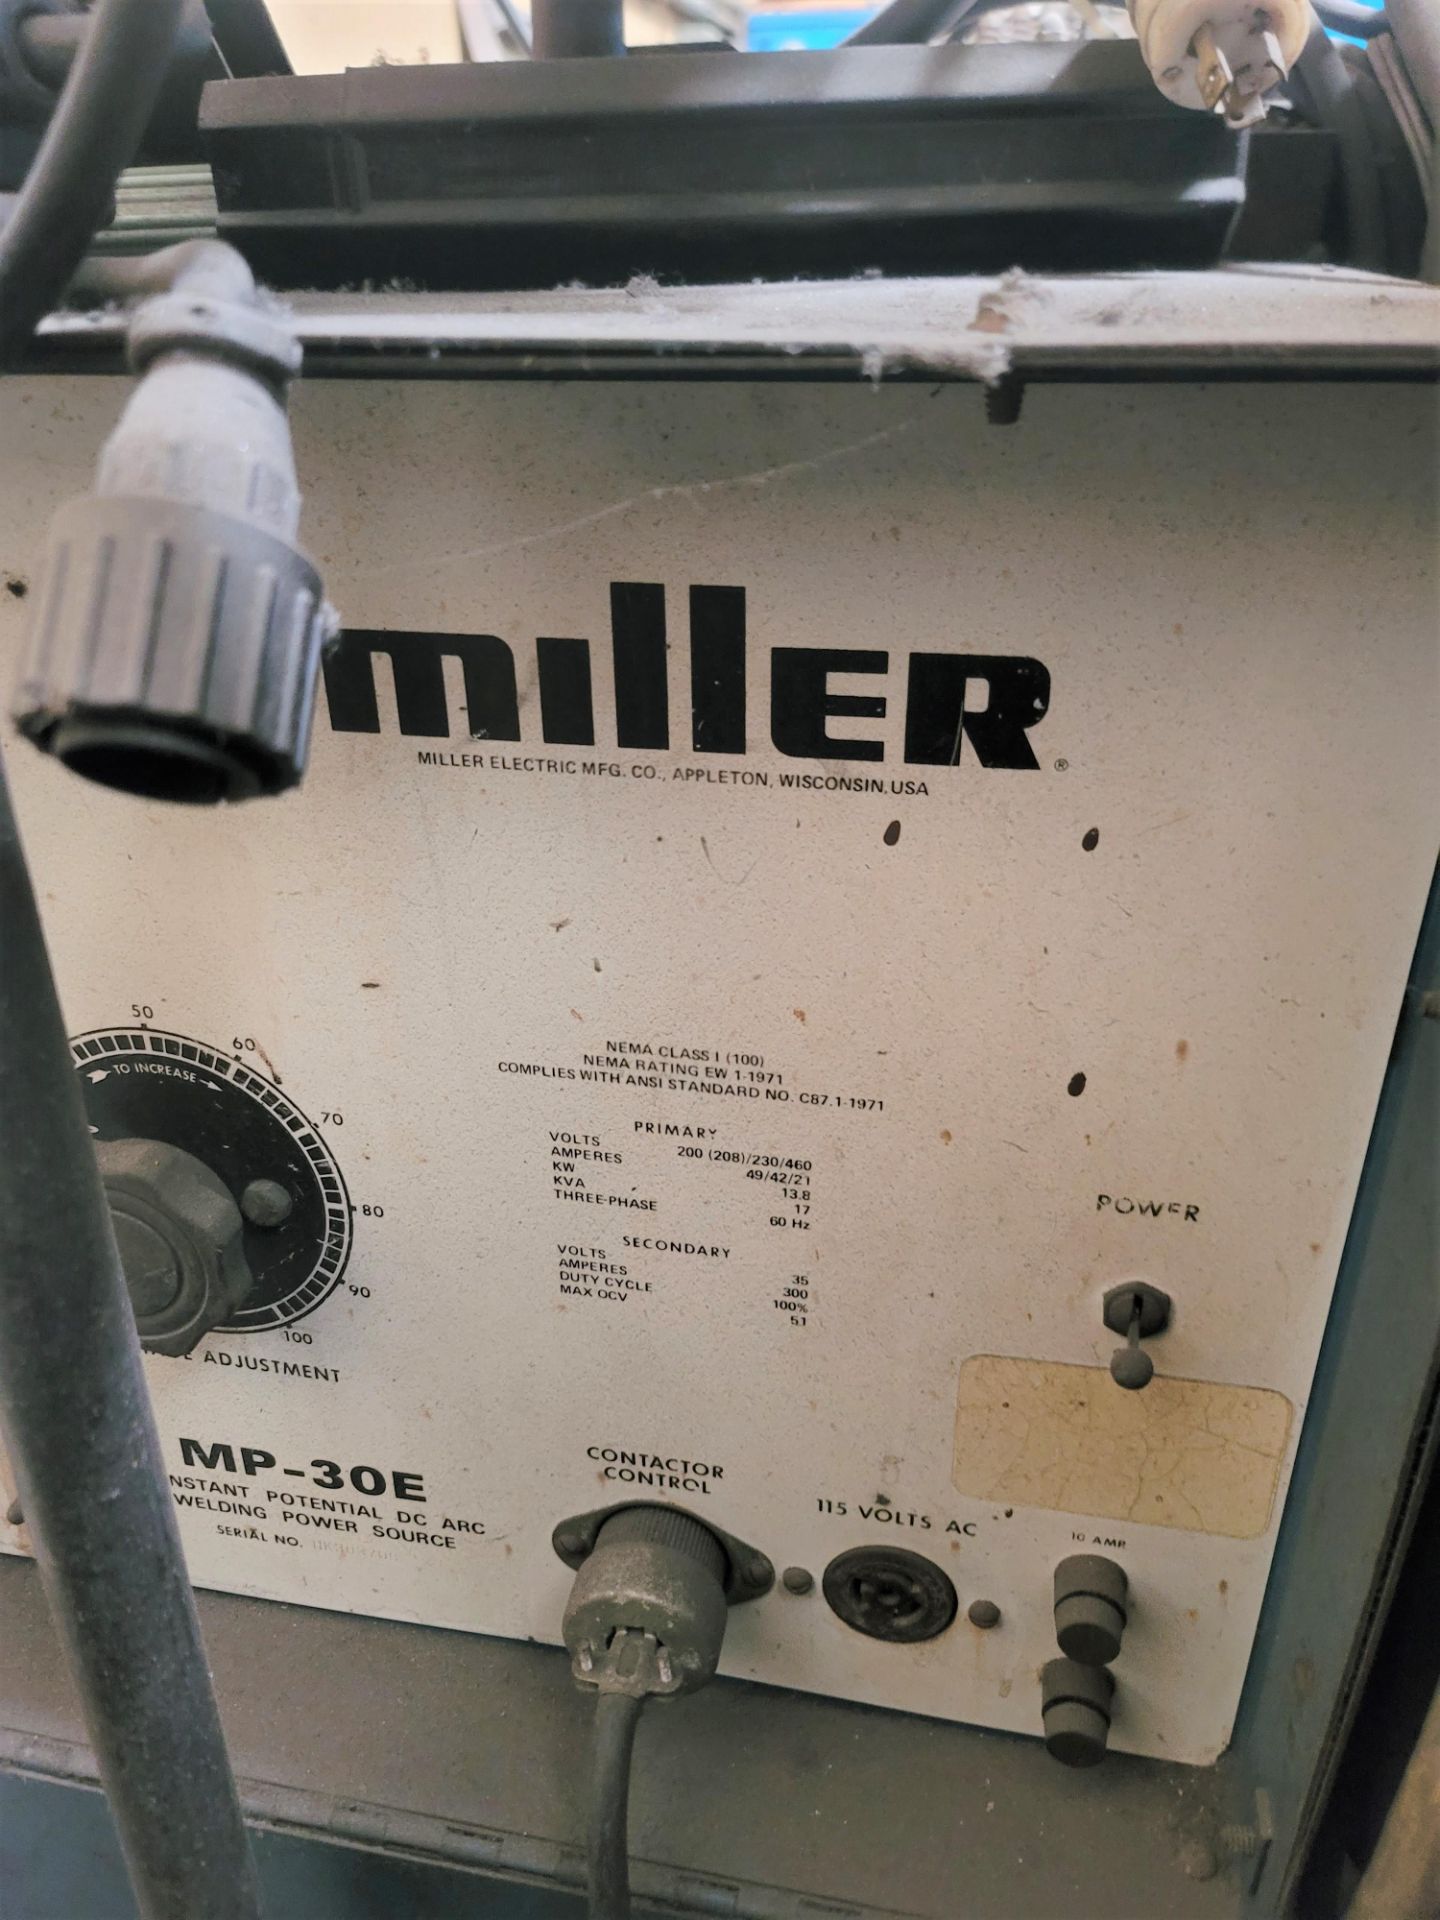 MILLER MP-30E WELDING POWER SOURCE, W/ MILLERMATIC 30A WIRE FEEDER - Image 3 of 3